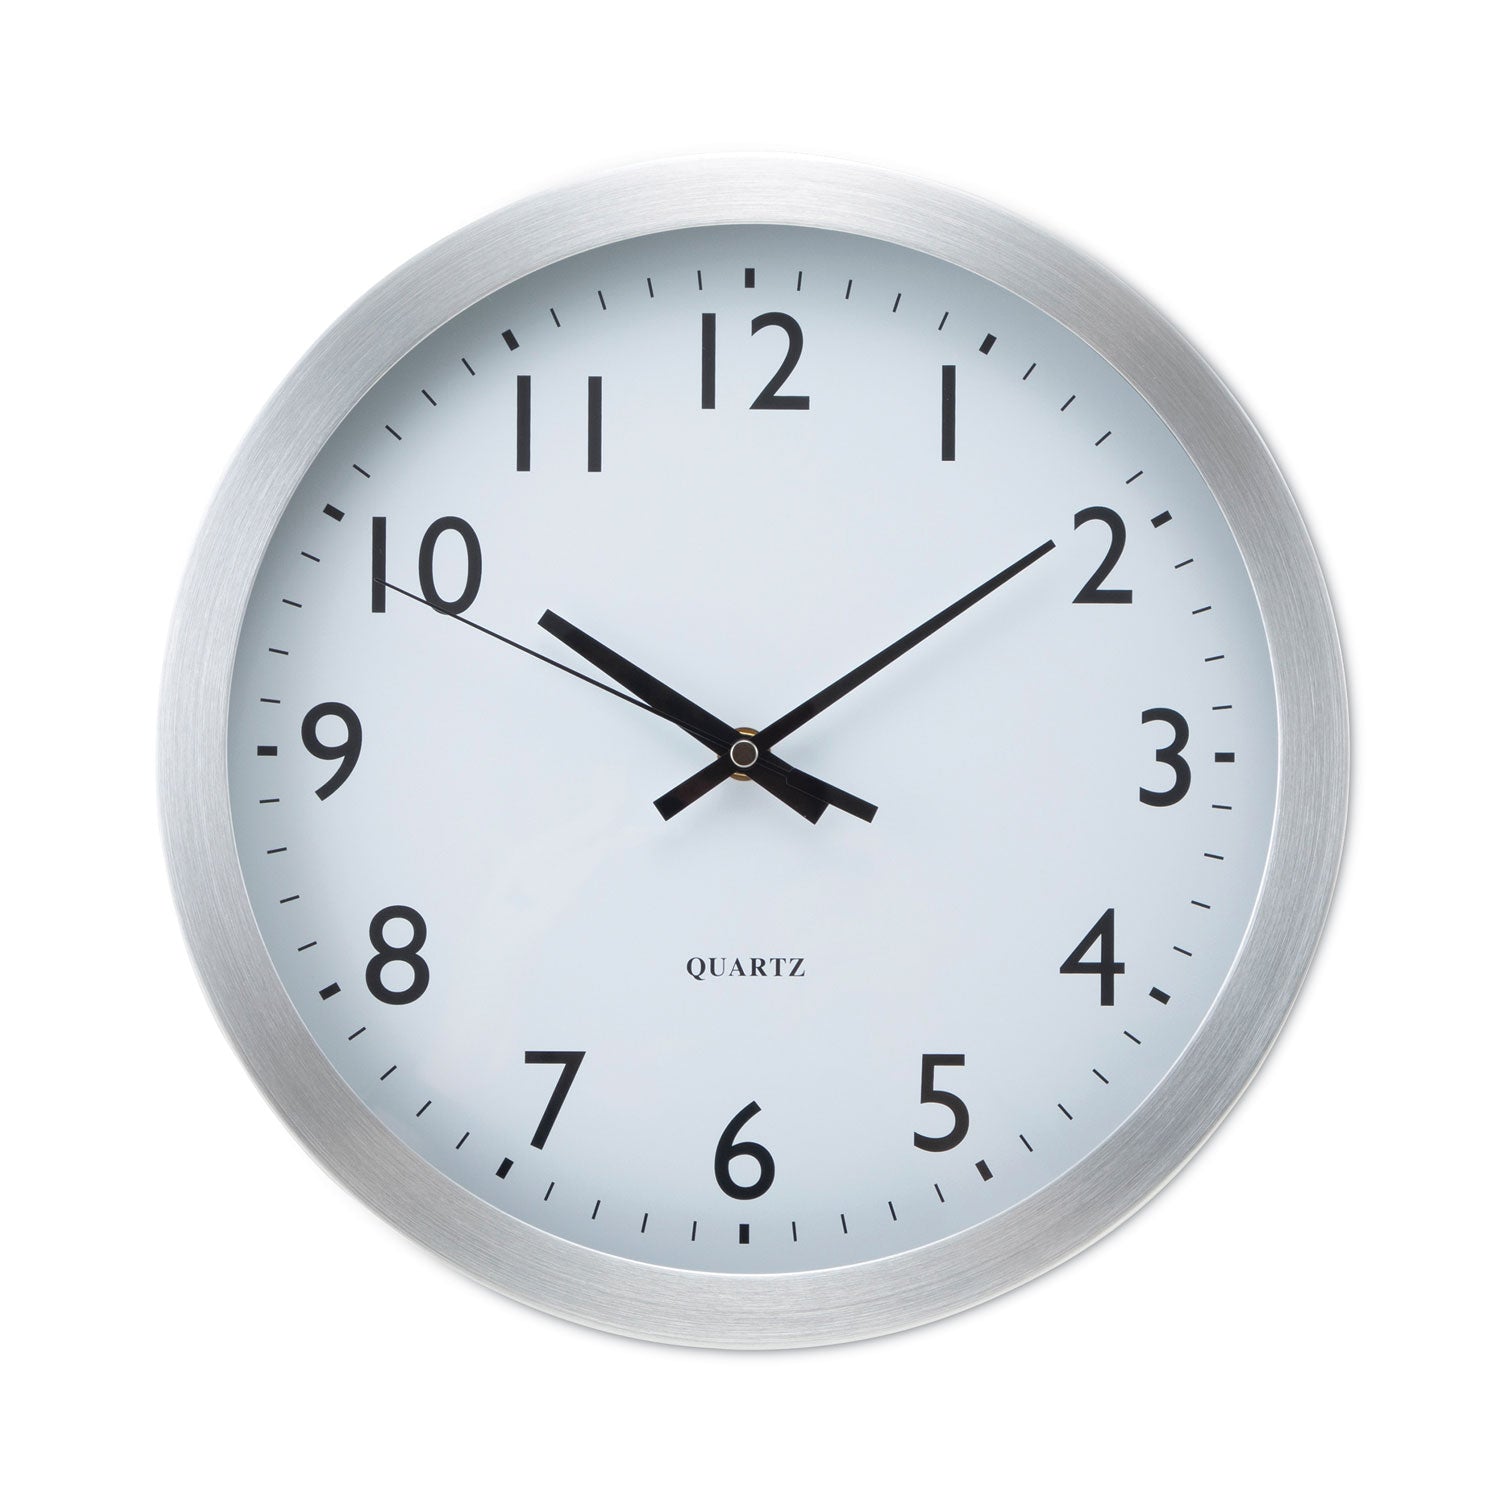 brushed-aluminum-wall-clock-12-overall-diameter-silver-case-1-aa-sold-separately_unv10425 - 1